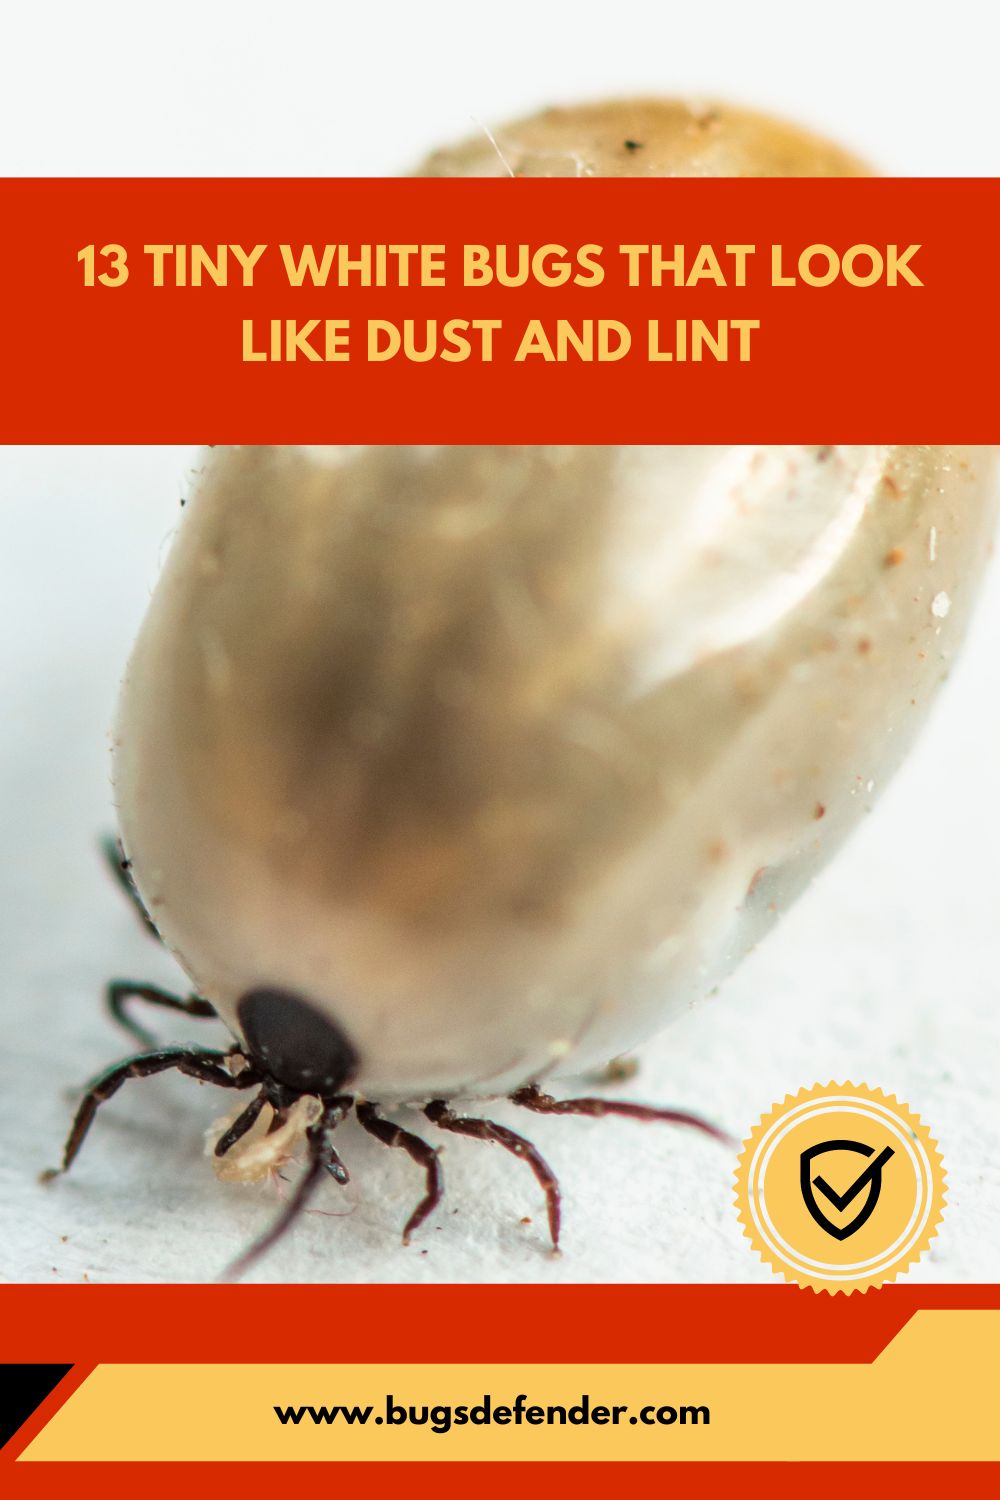 13 Tiny White Bugs That Look Like Dust and Lint pin2